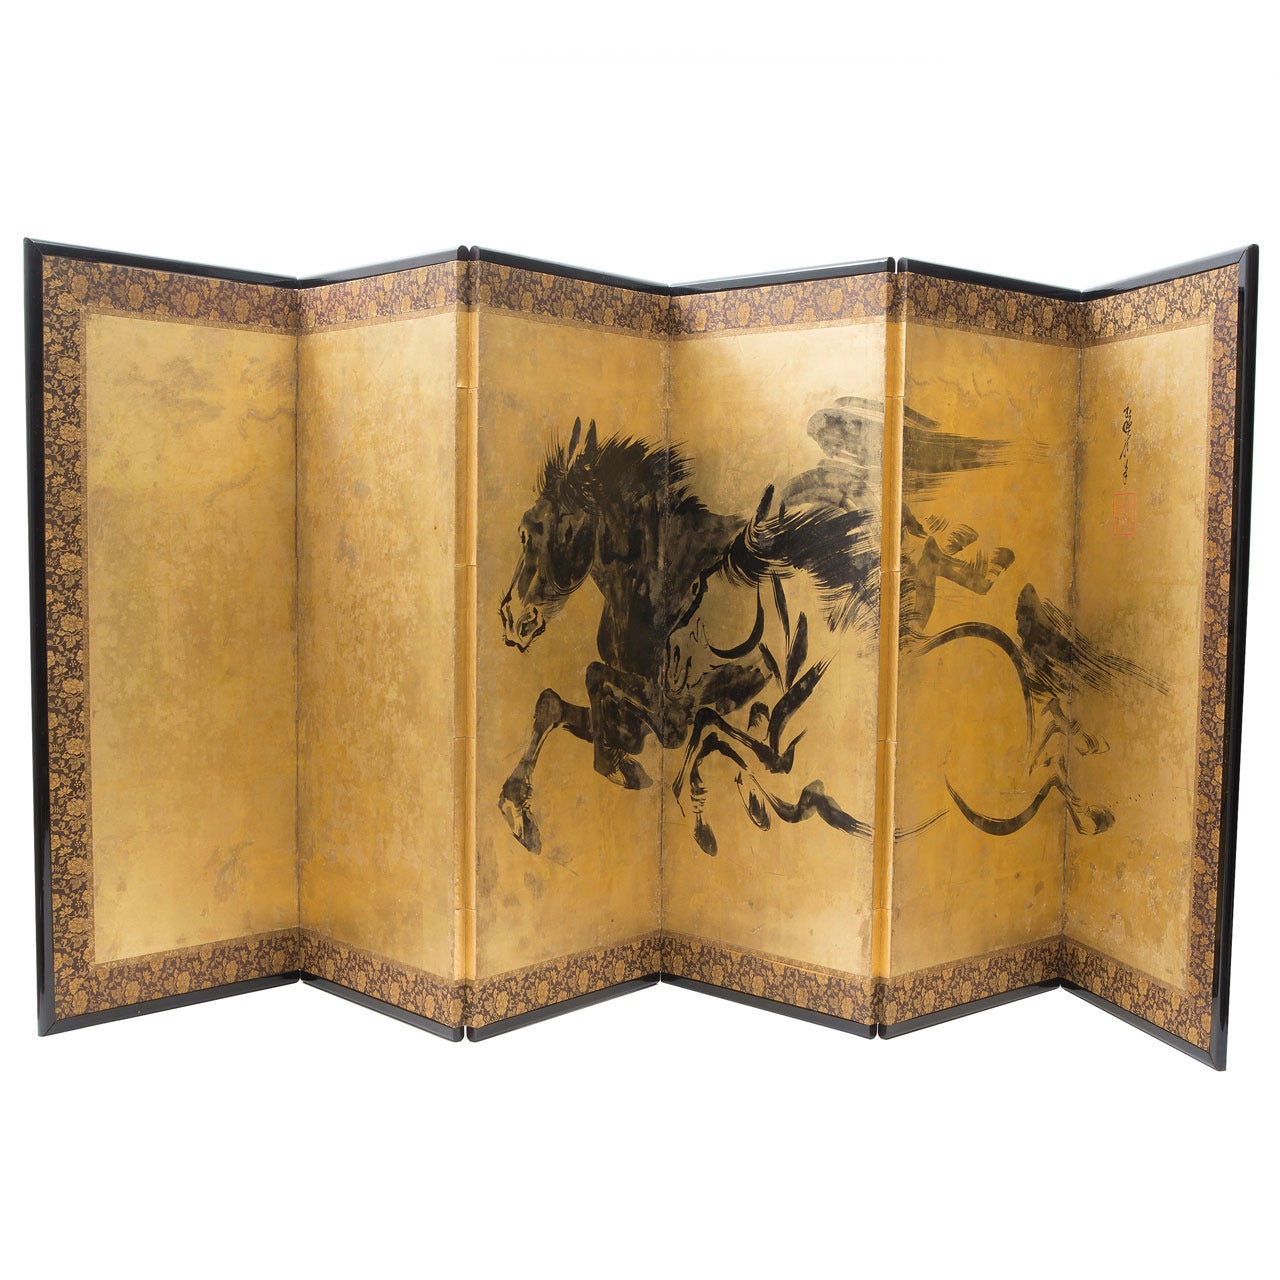 Wall-Mounted 19th Century Japanese Paper Screen with Painted Galloping Horses